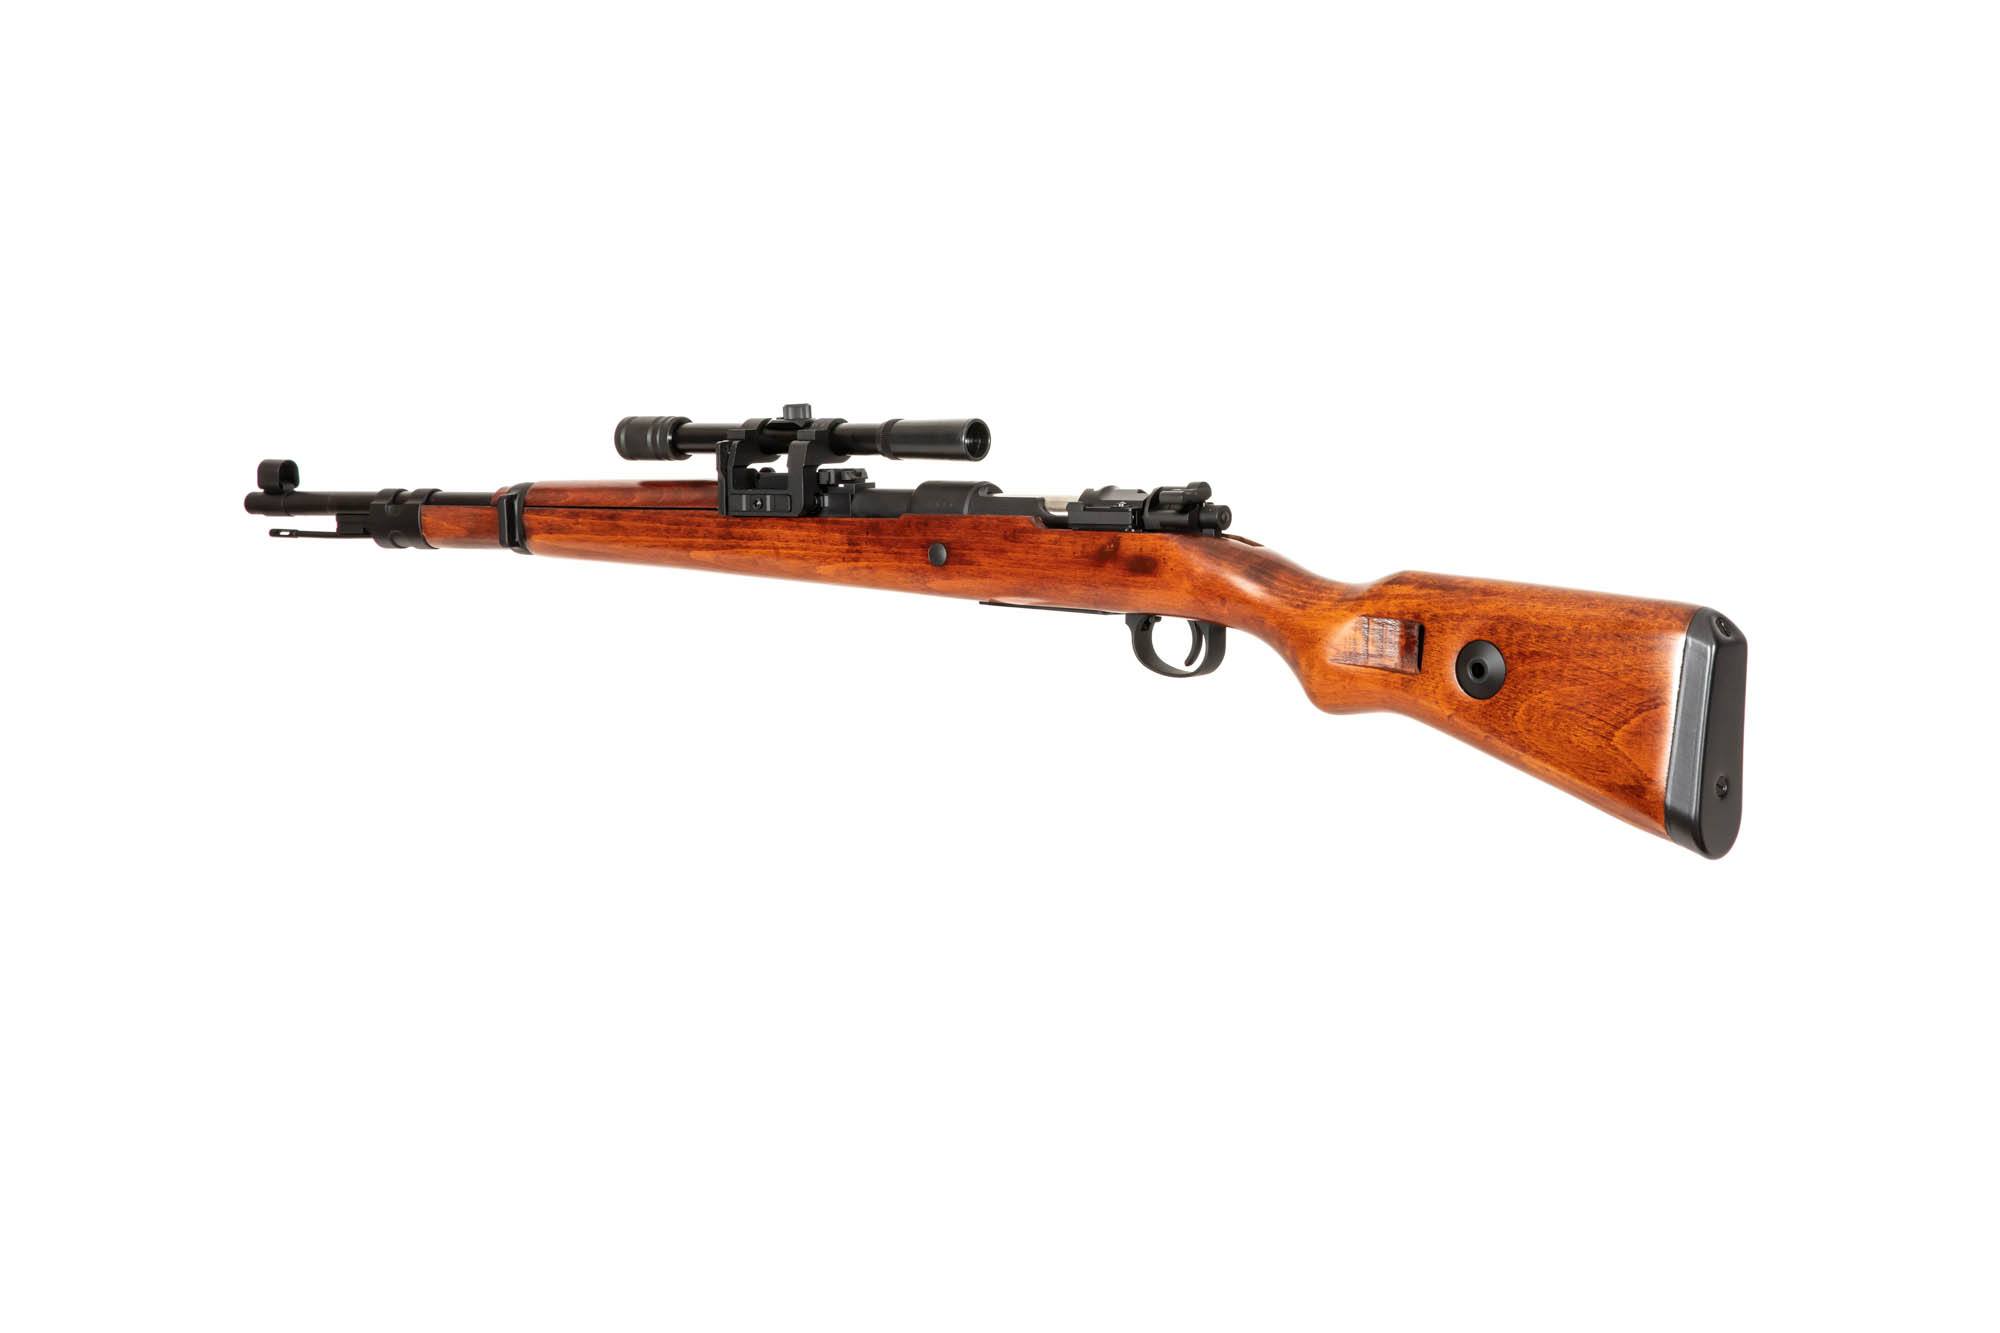 Kar98 Sniper Rifle with scope (wood stock)